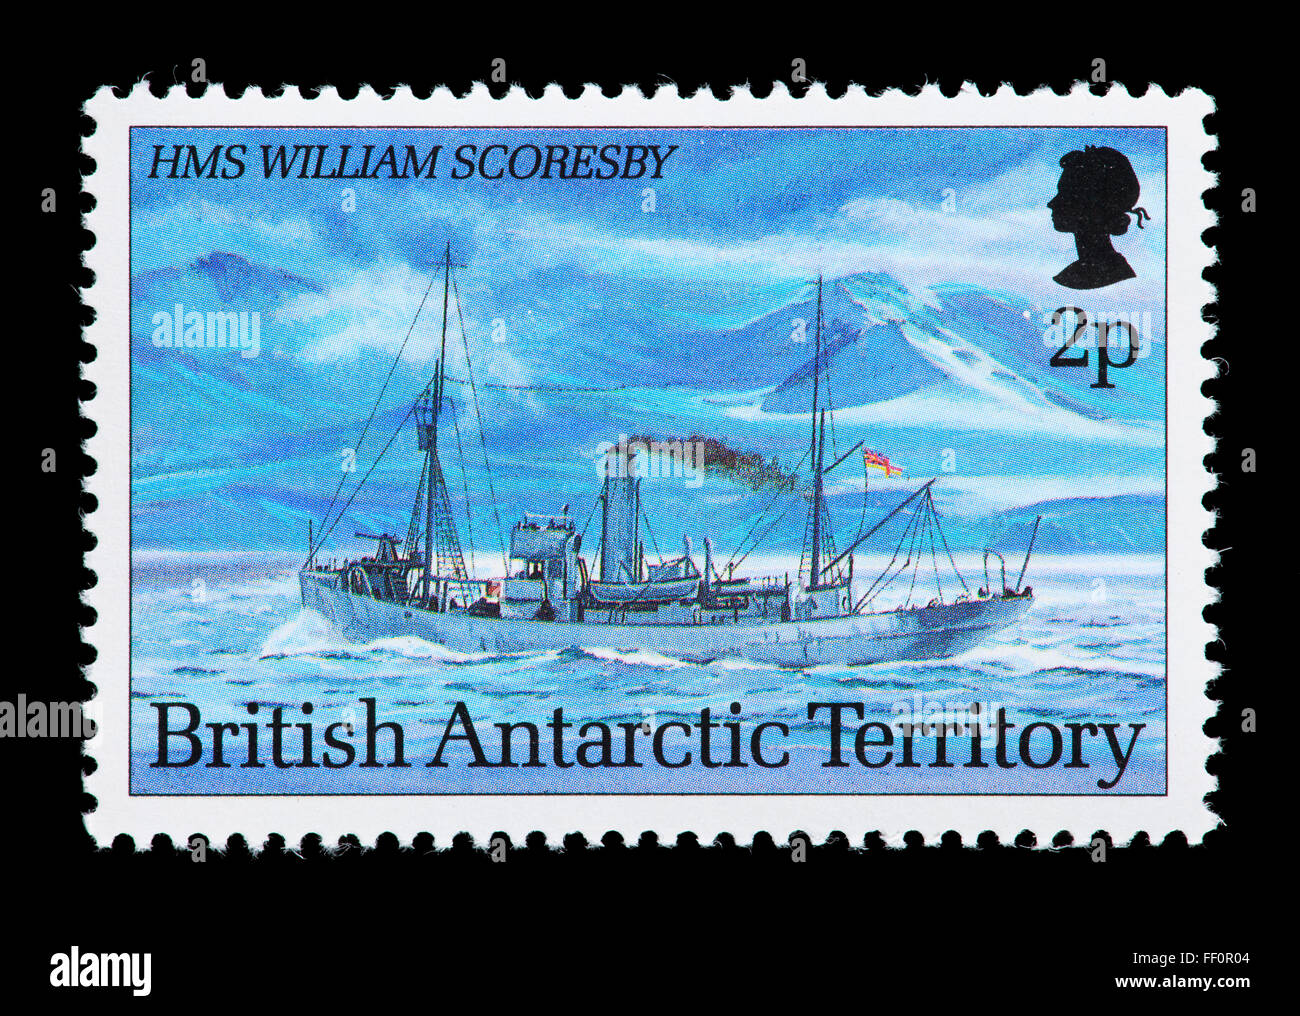 Postage stamp from the Britsh Antarctic Territory depicting the research vessel HMS William Scoresby. Stock Photo